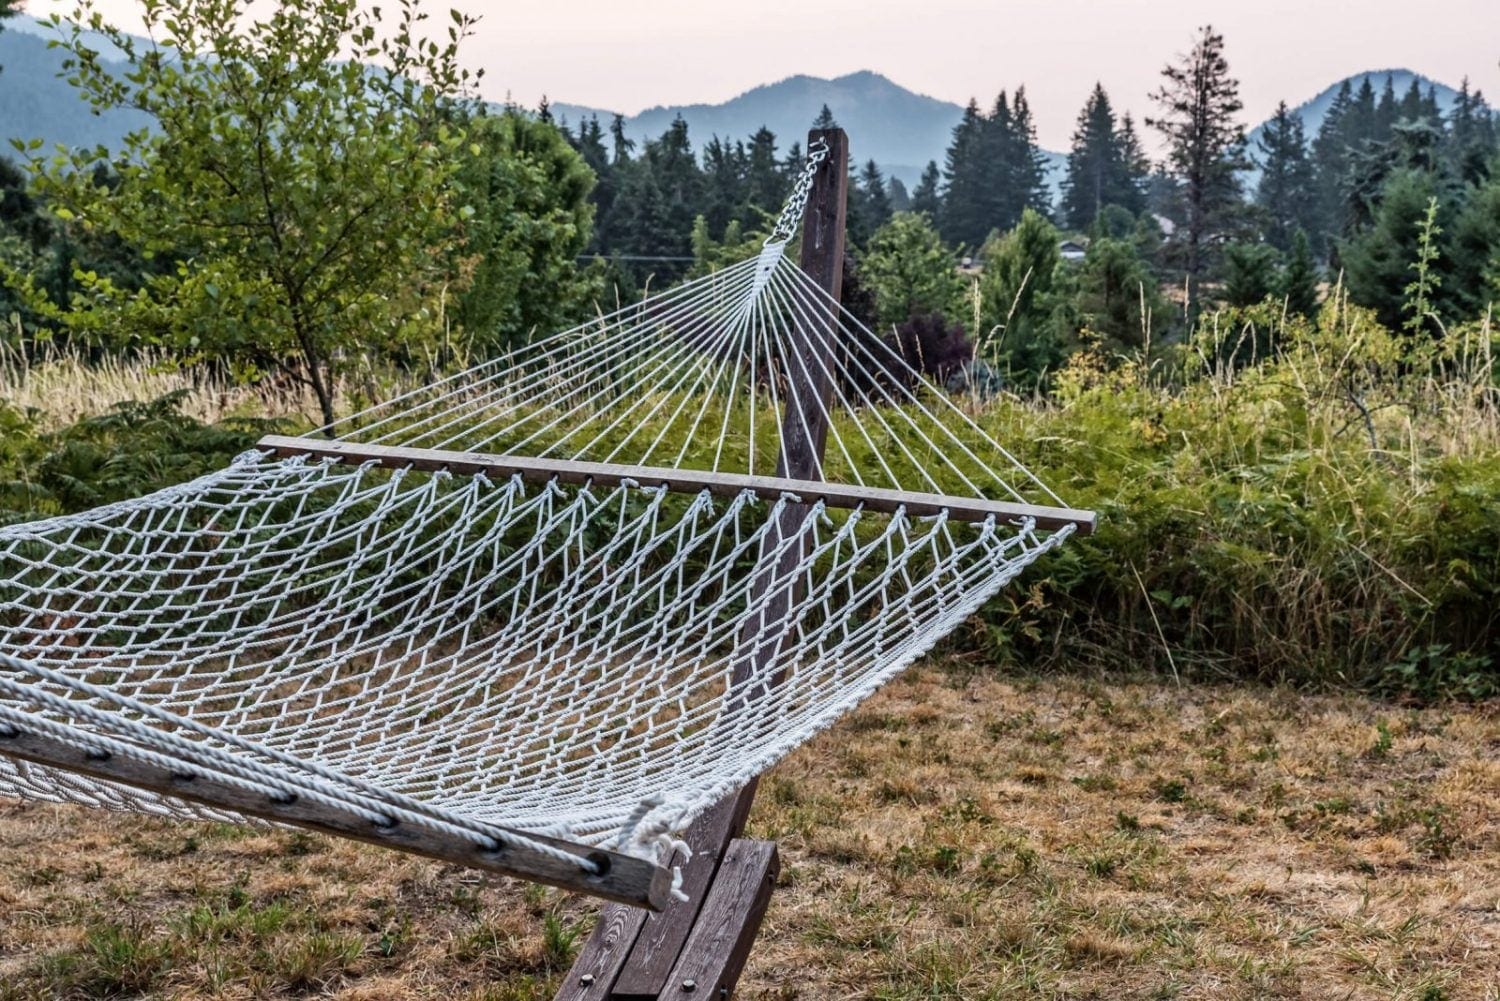 A hammock looks toward the Gorge from the grounds at Carson Ridge Luxury Cabins in Carson, Washington.